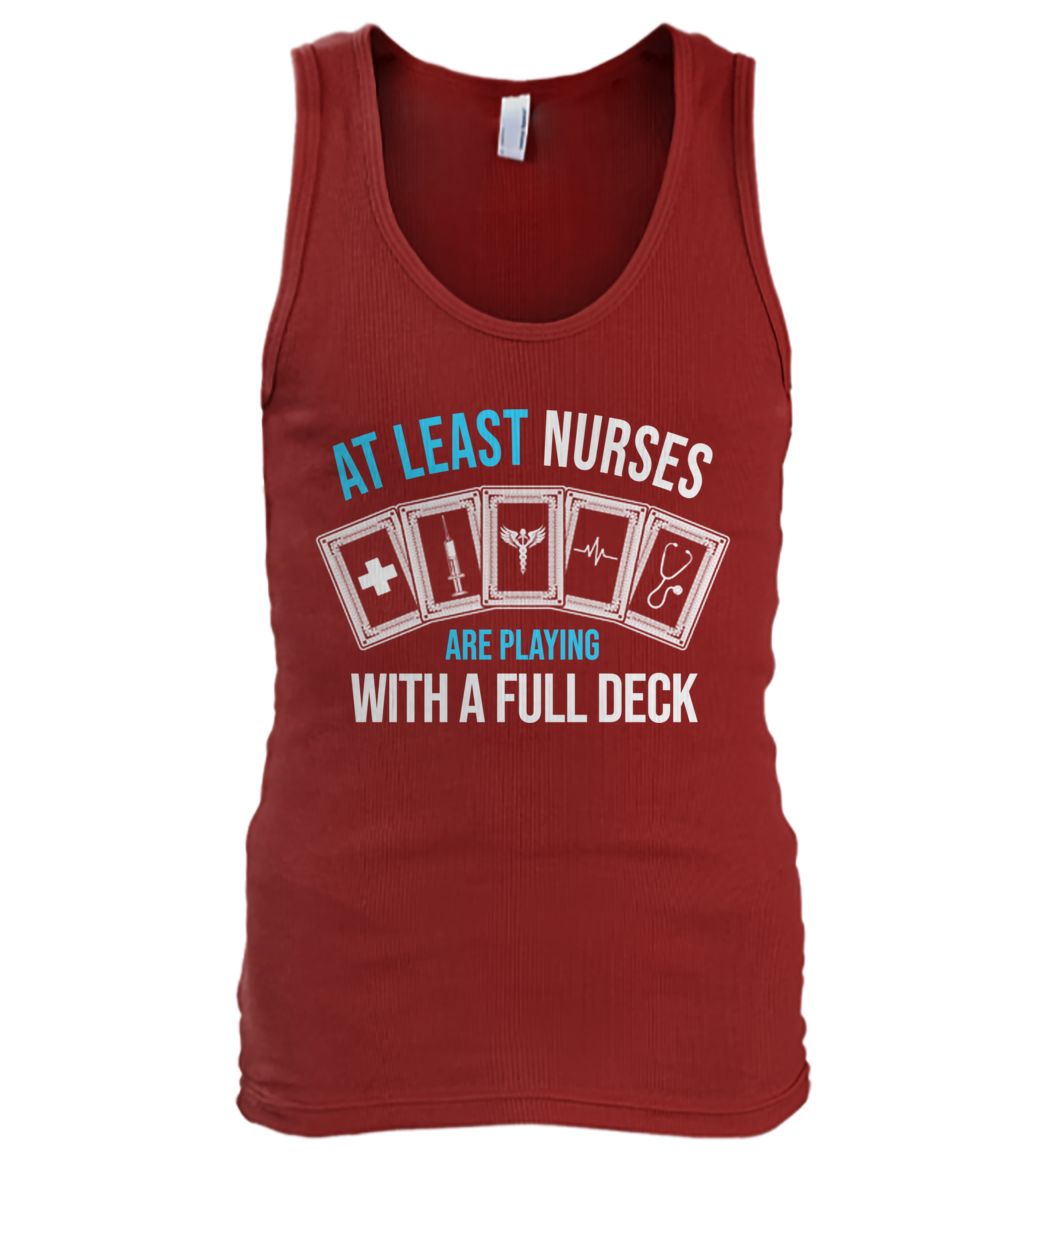 At least nurse are playing with a full deck men's tank top